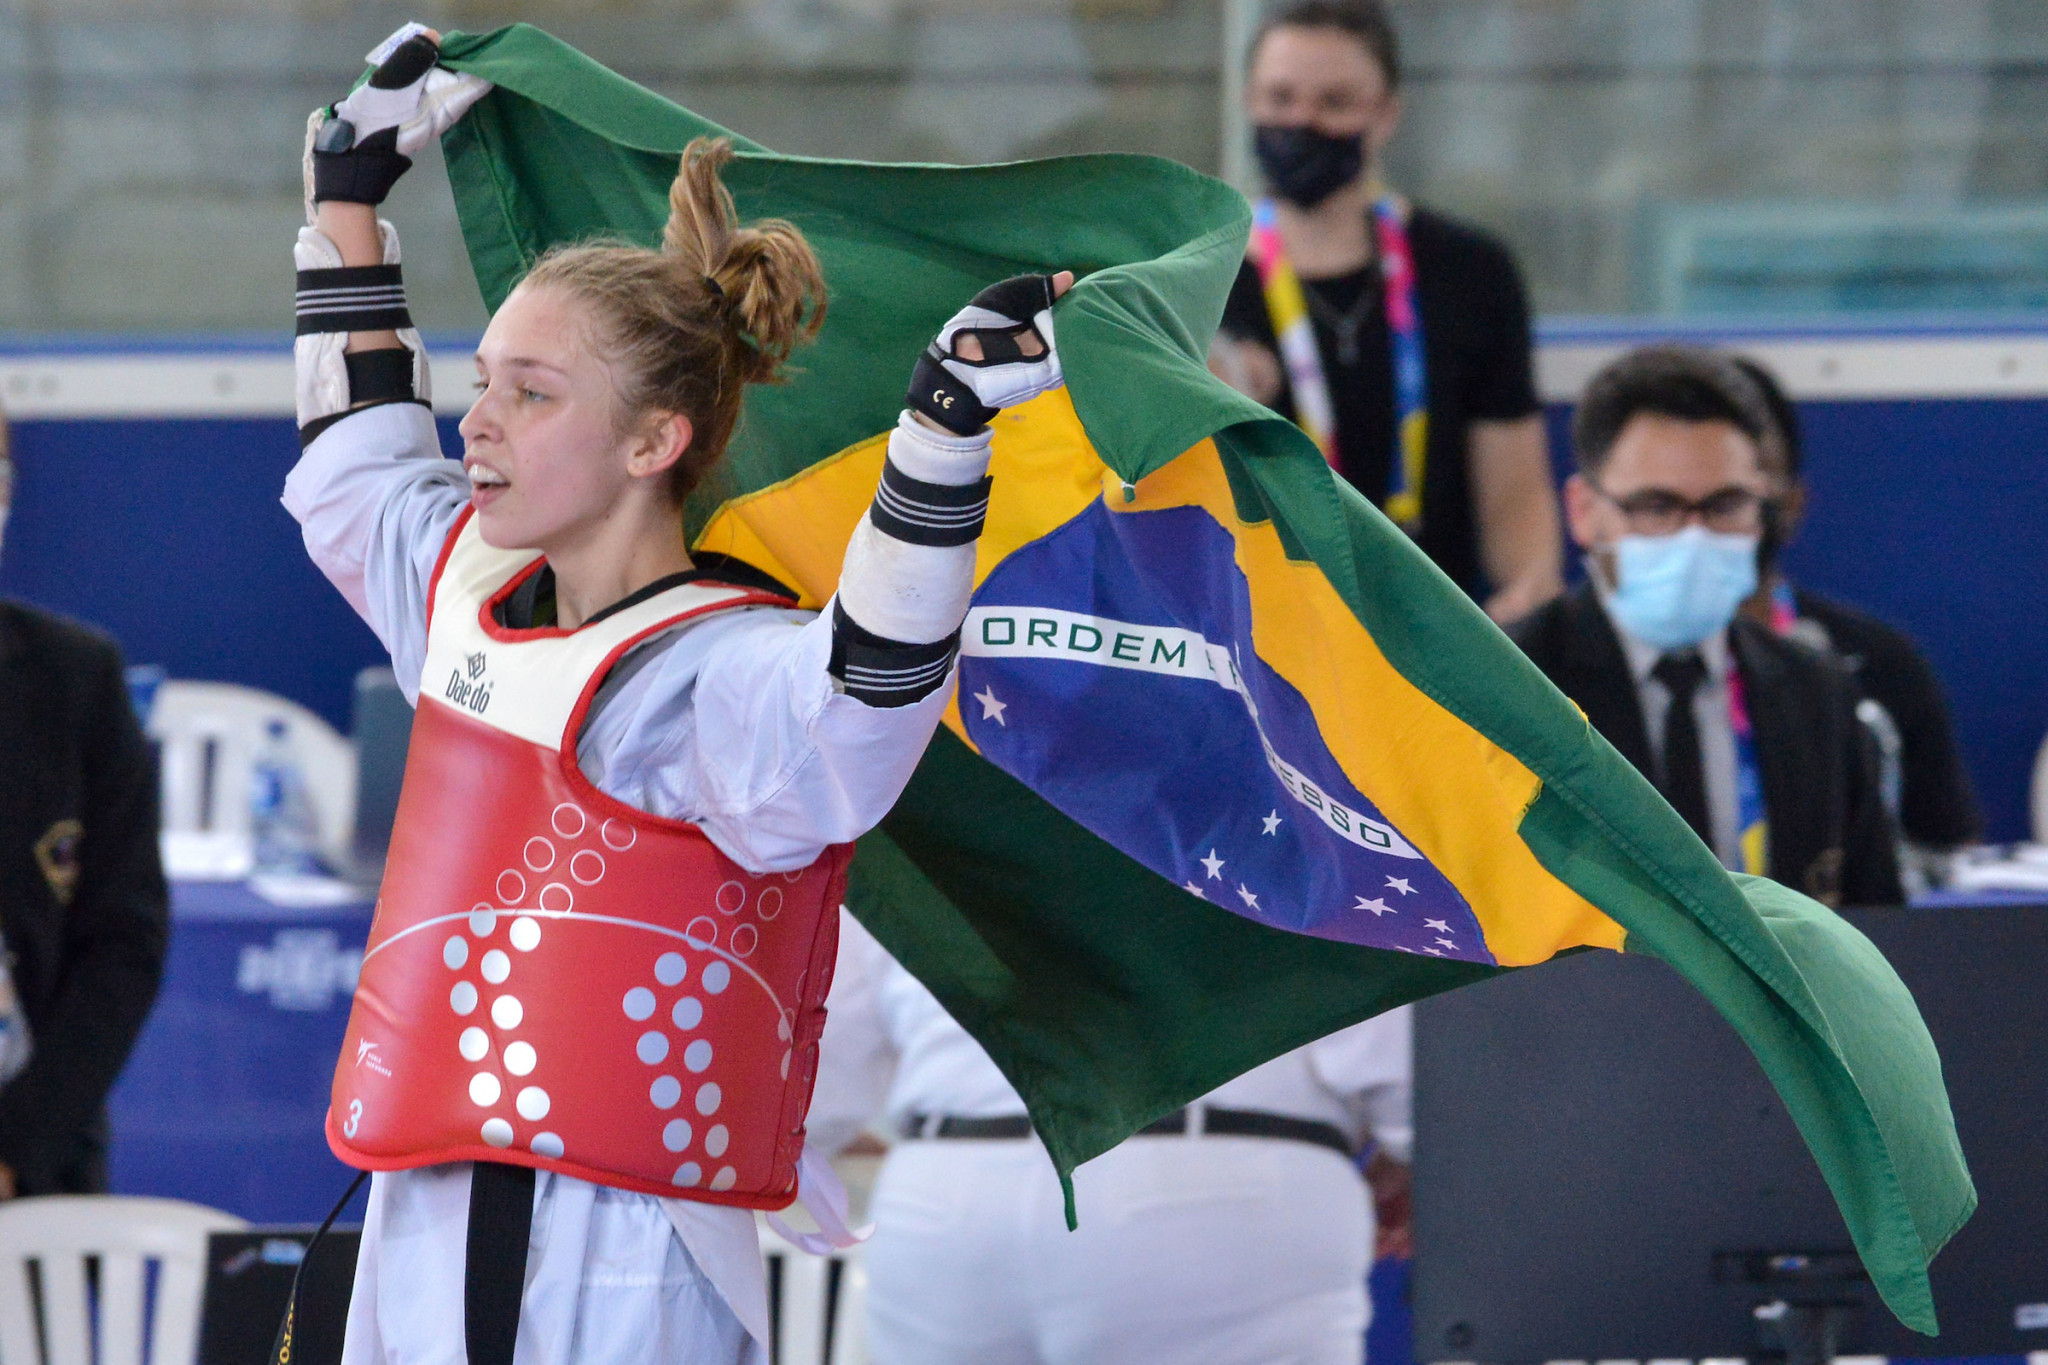 There was more joy in store for Brazil at the Hockey Miguel Calero Arena as Sandy Camila Leite fought her way to the gold medal in the women's 49kg-57kg final ©Agencia.Xpress Media